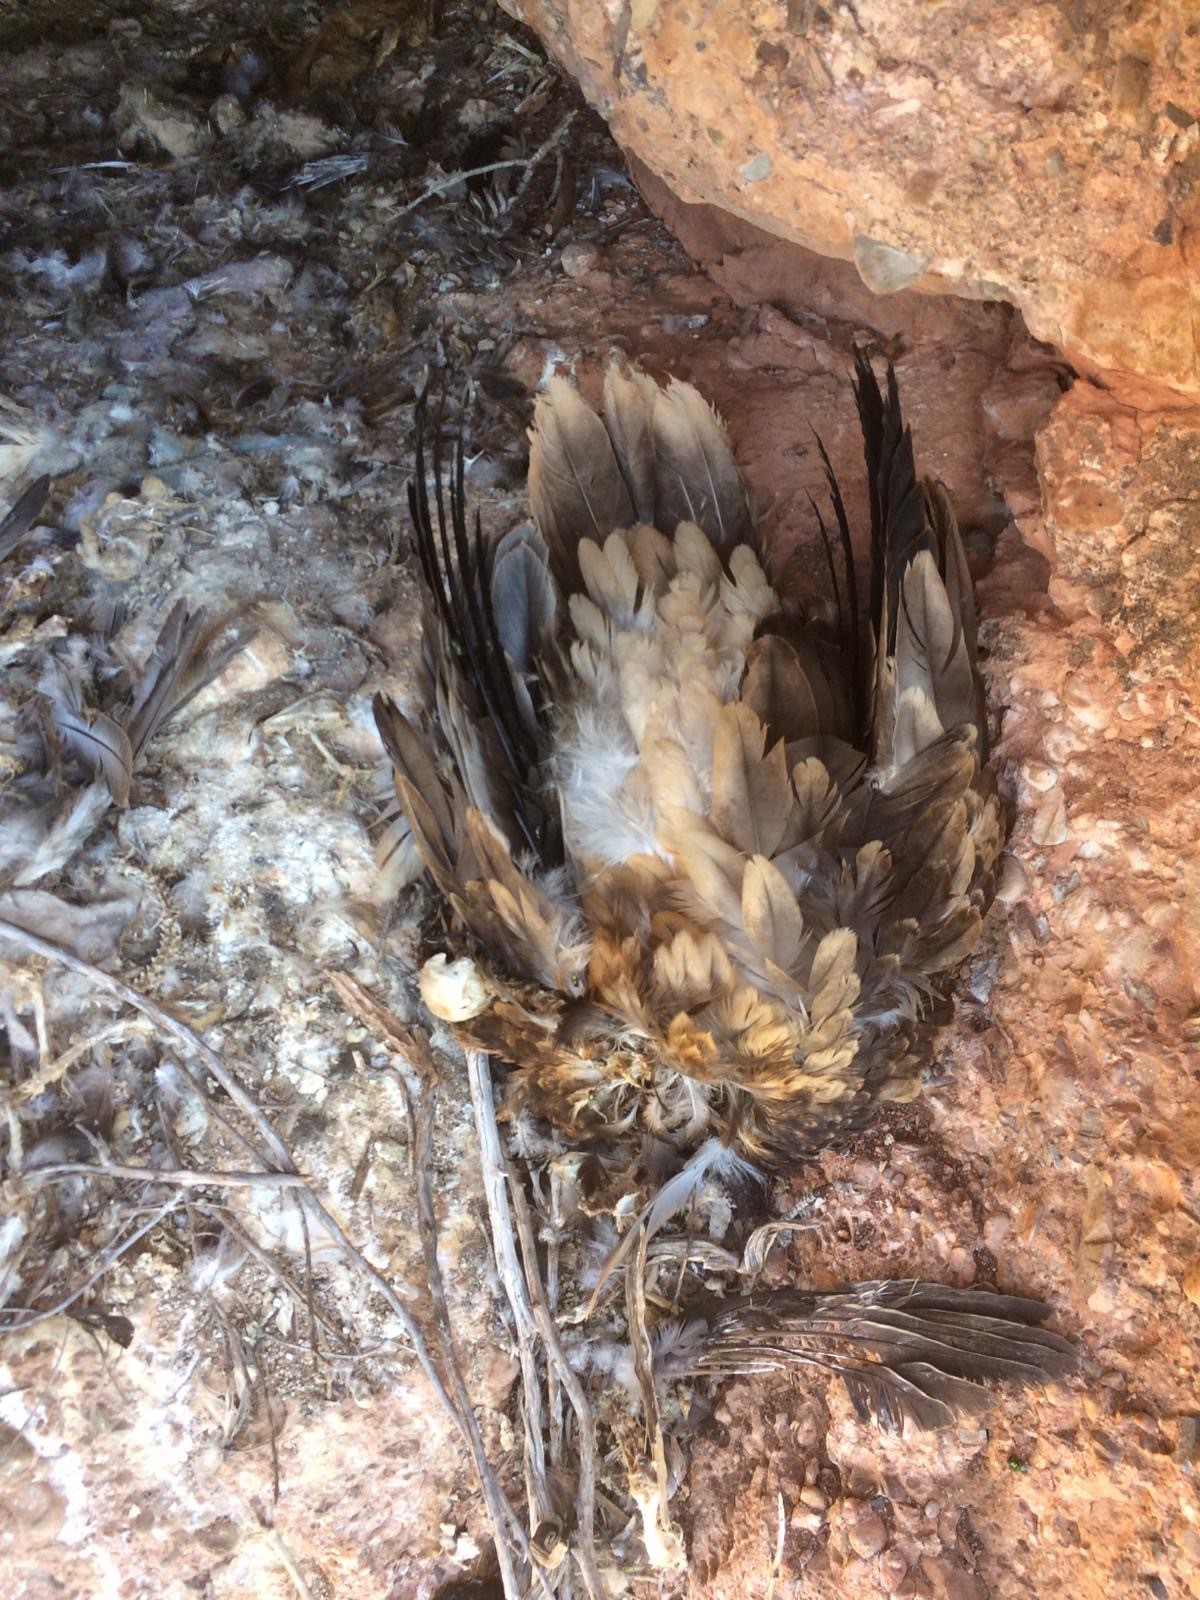 An Egyptian vulture dead due to rodenticide consumption.